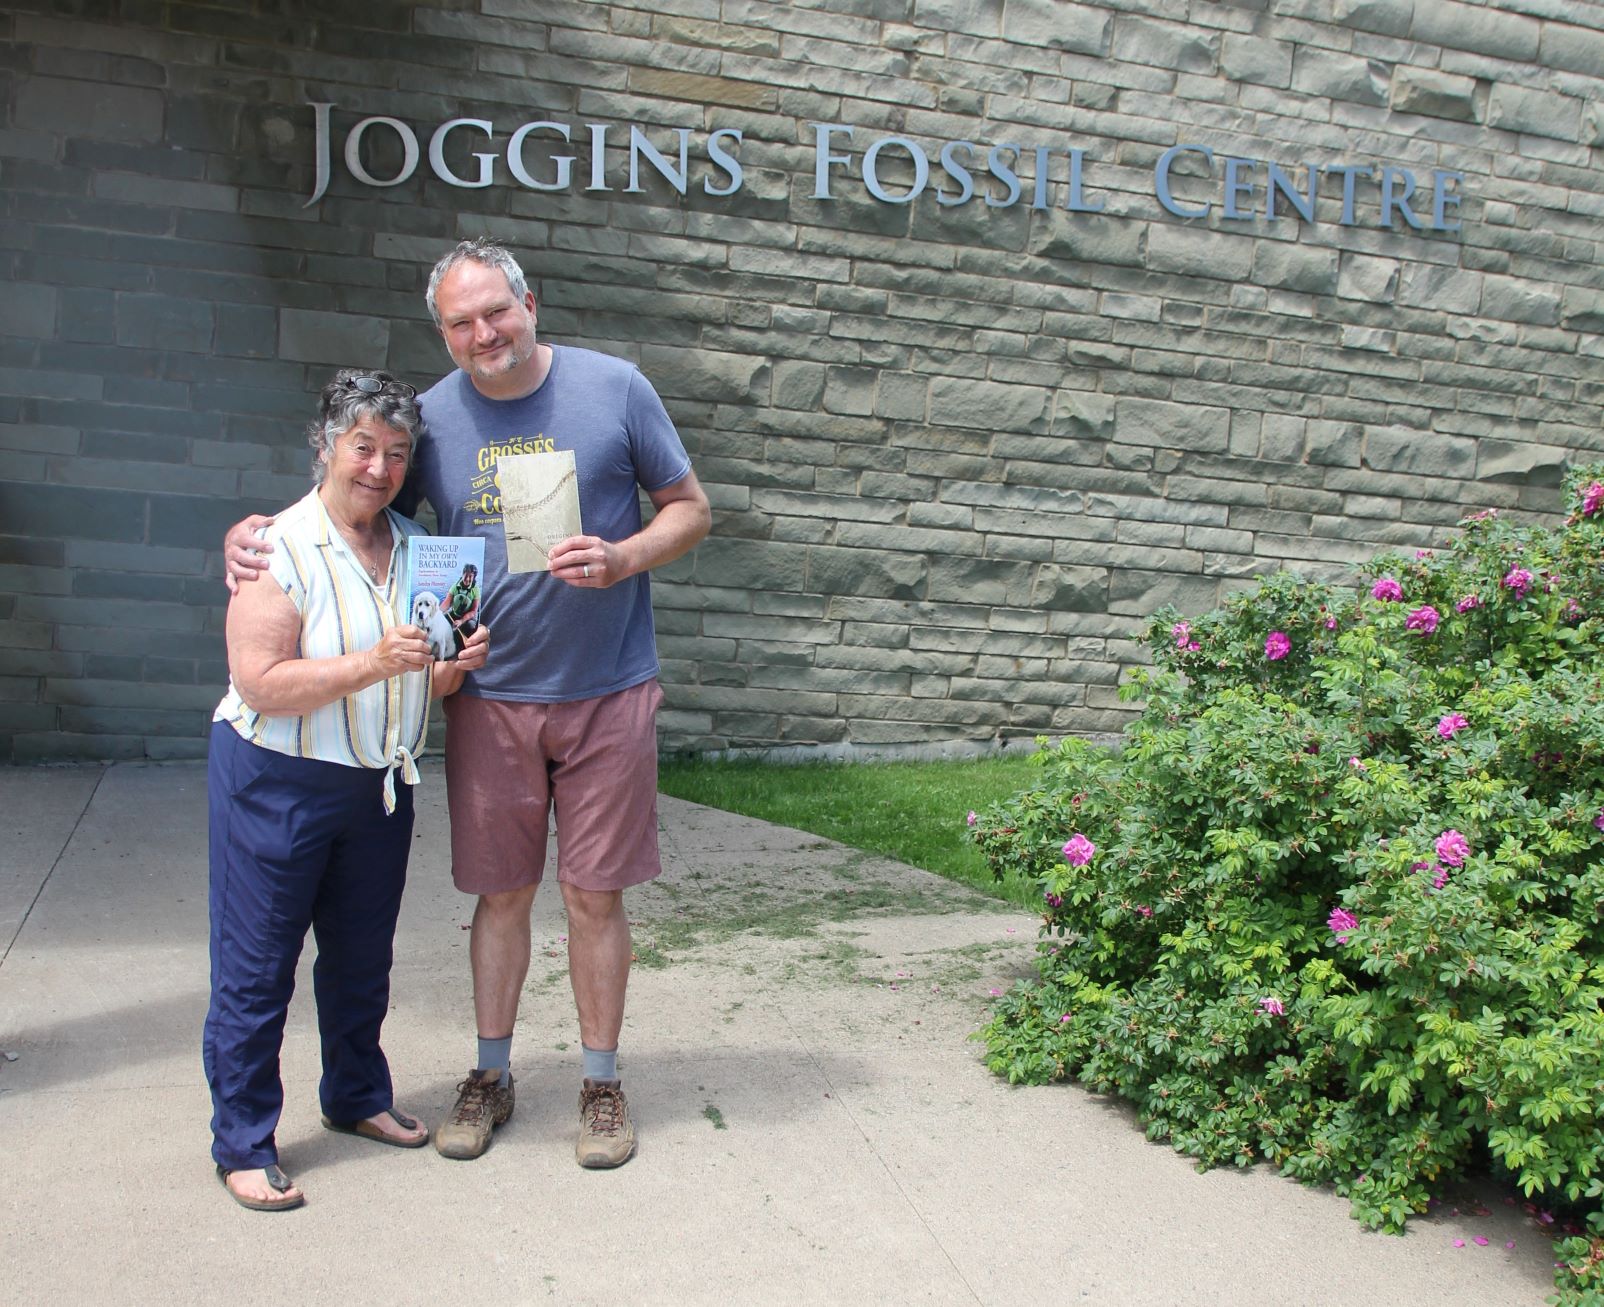 Darryl and Sandra in from tof the Joggins Fossil Institute